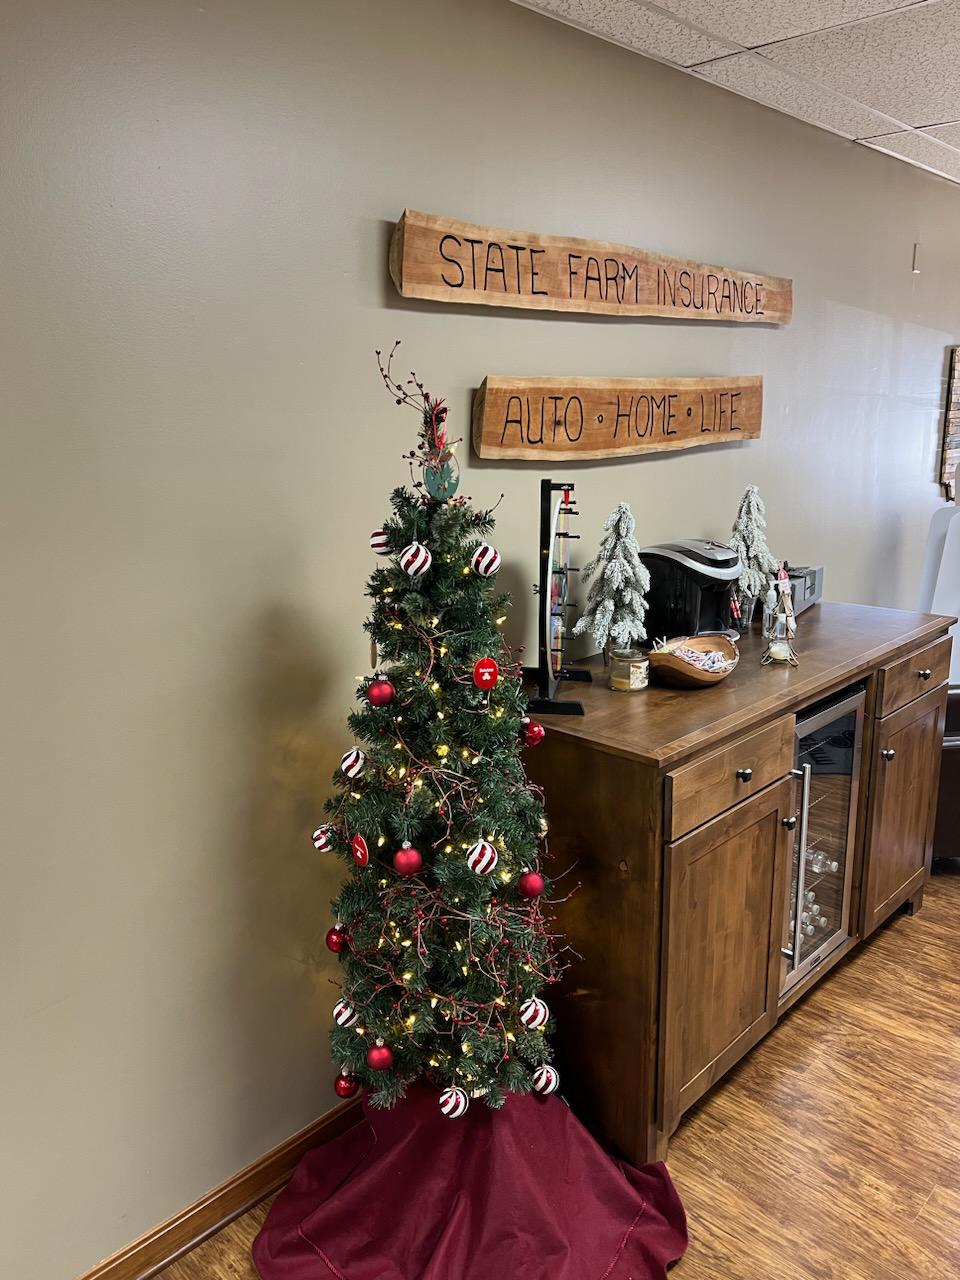 Getting festive at Jared Swank's State Farm Insurance office Olmsted Falls